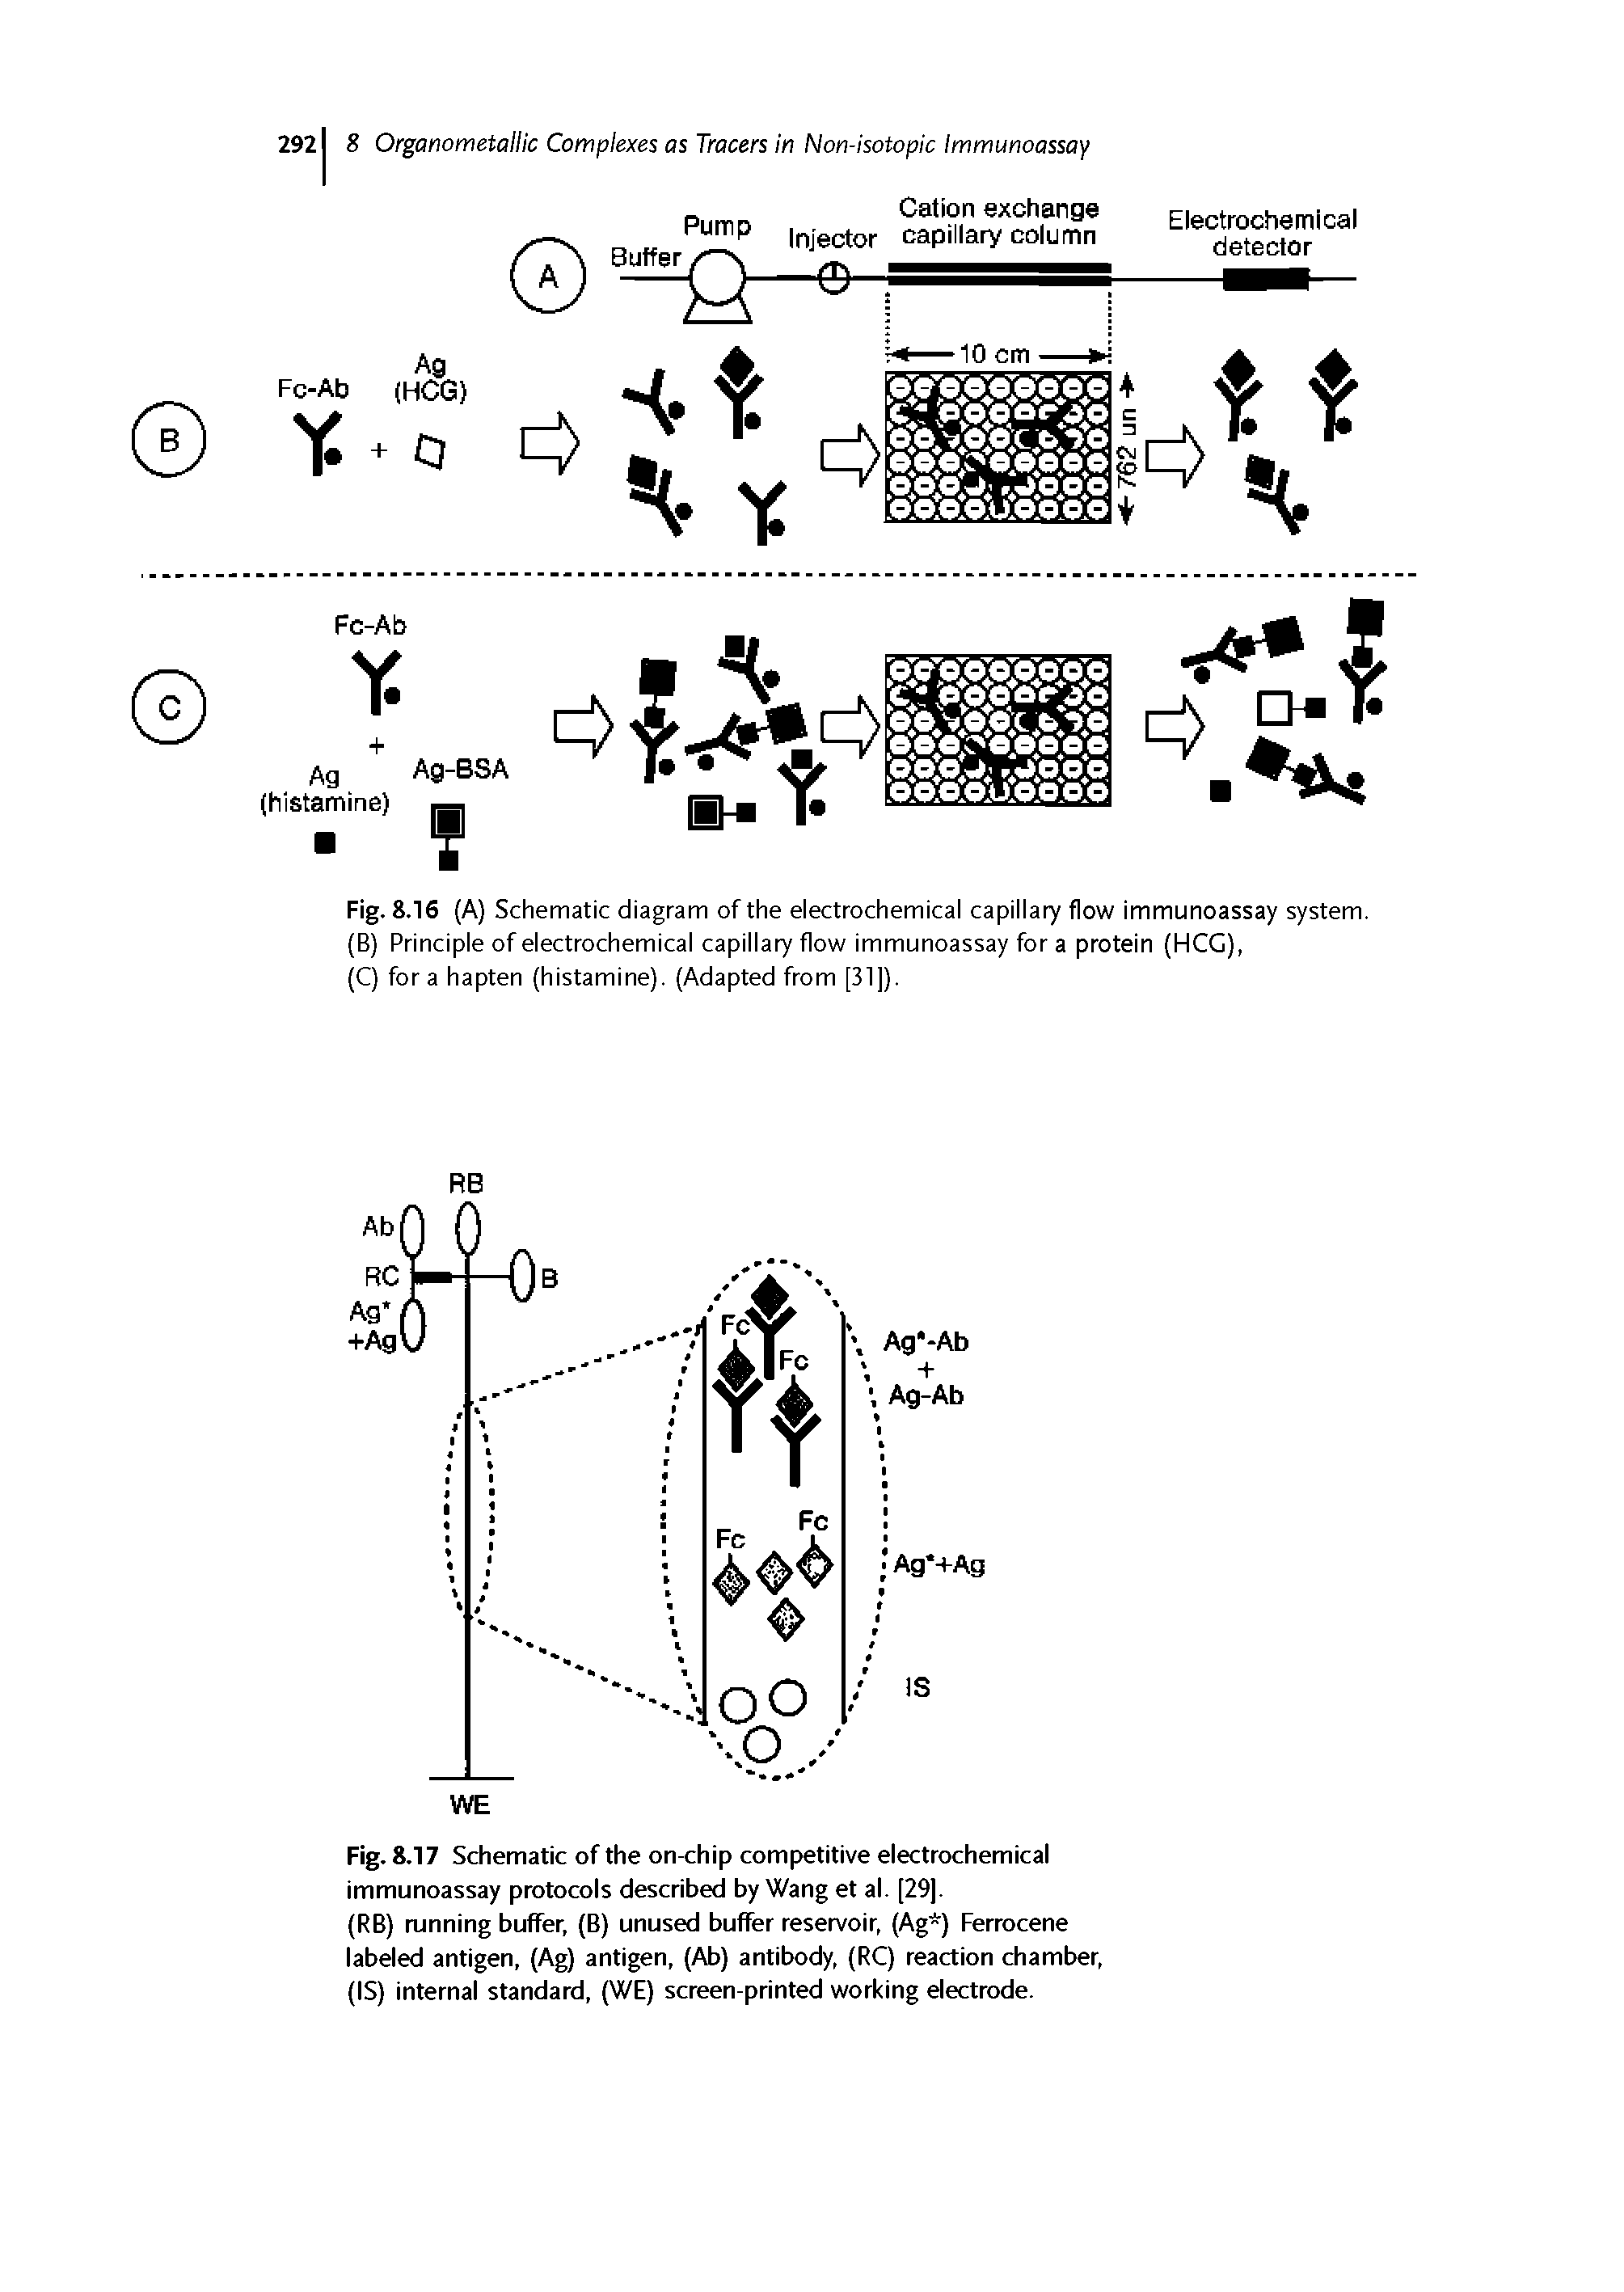 Fig. 8.16 (A) Schematic diagram of the electrochemical capillary flow immunoassay system. (B) Principle of electrochemical capillary flow immunoassay for a protein (HCG),...